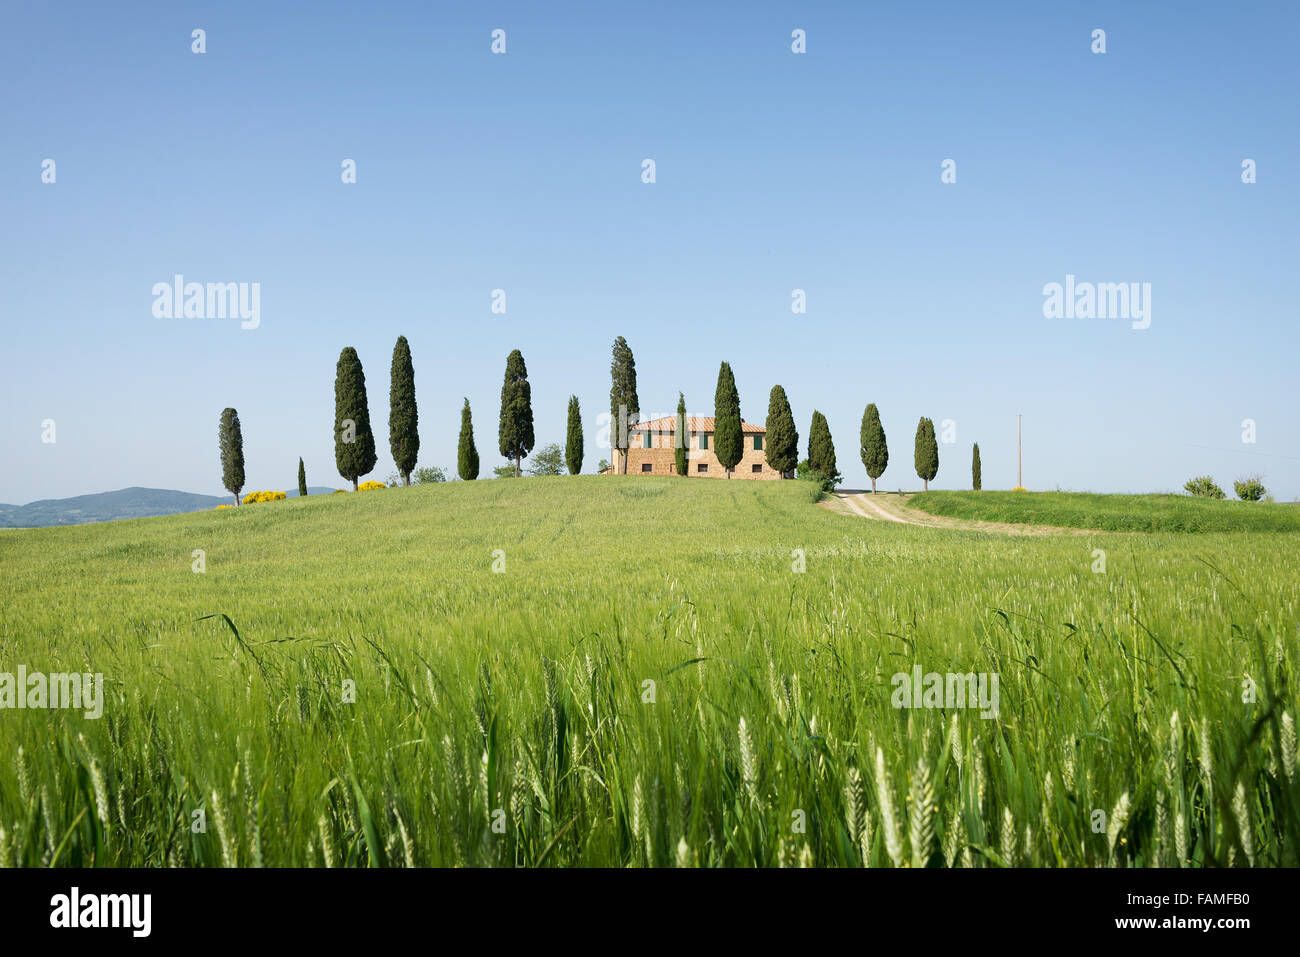 A farmhouse in Tuscany on a hill with cypress trees and a green field with young wheat crops in Pienza, Val d'Orcia, Italy. Stock Photo